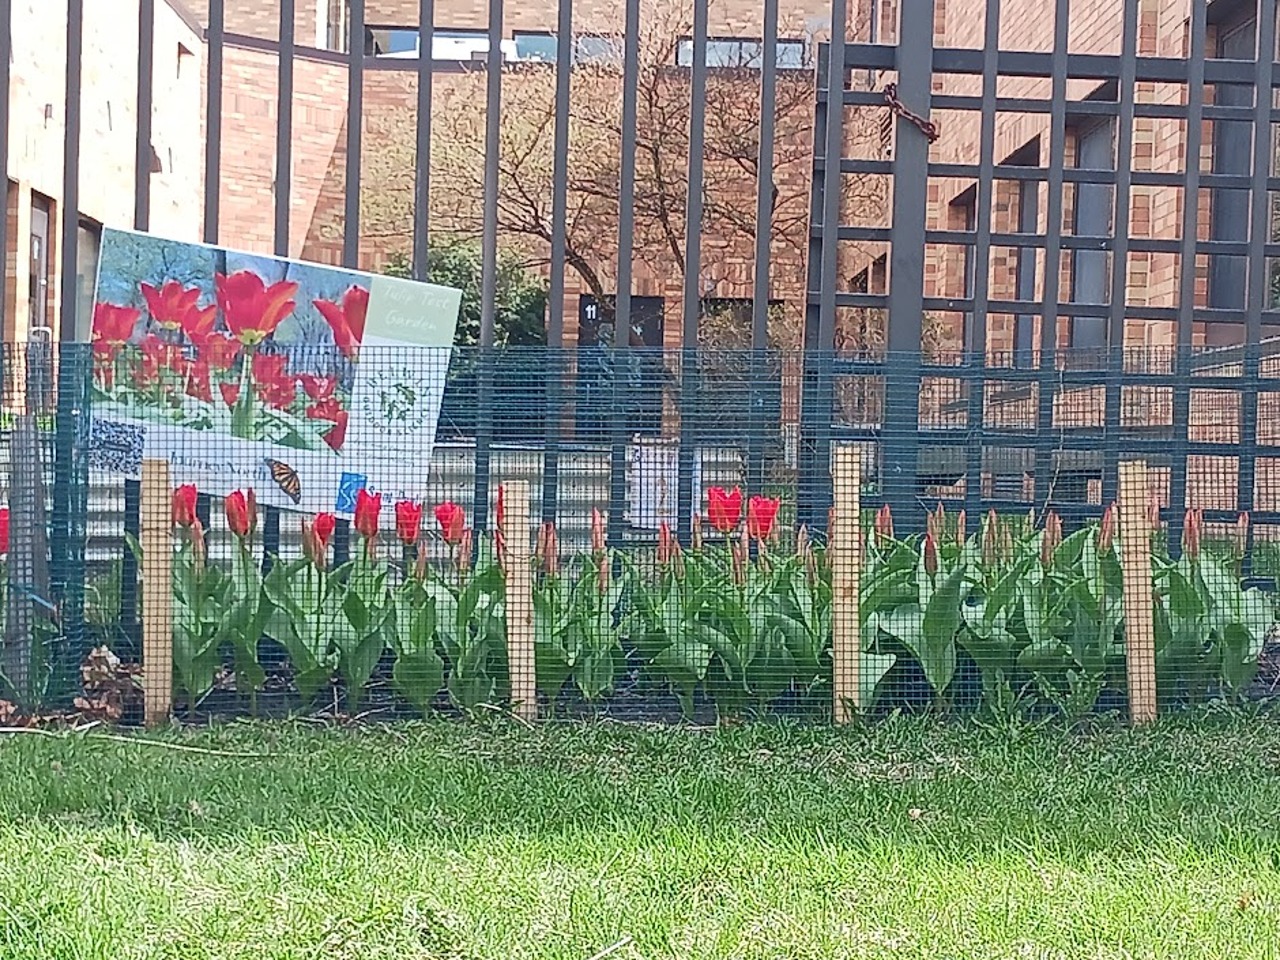 A row of blooming tulips in front of a fence